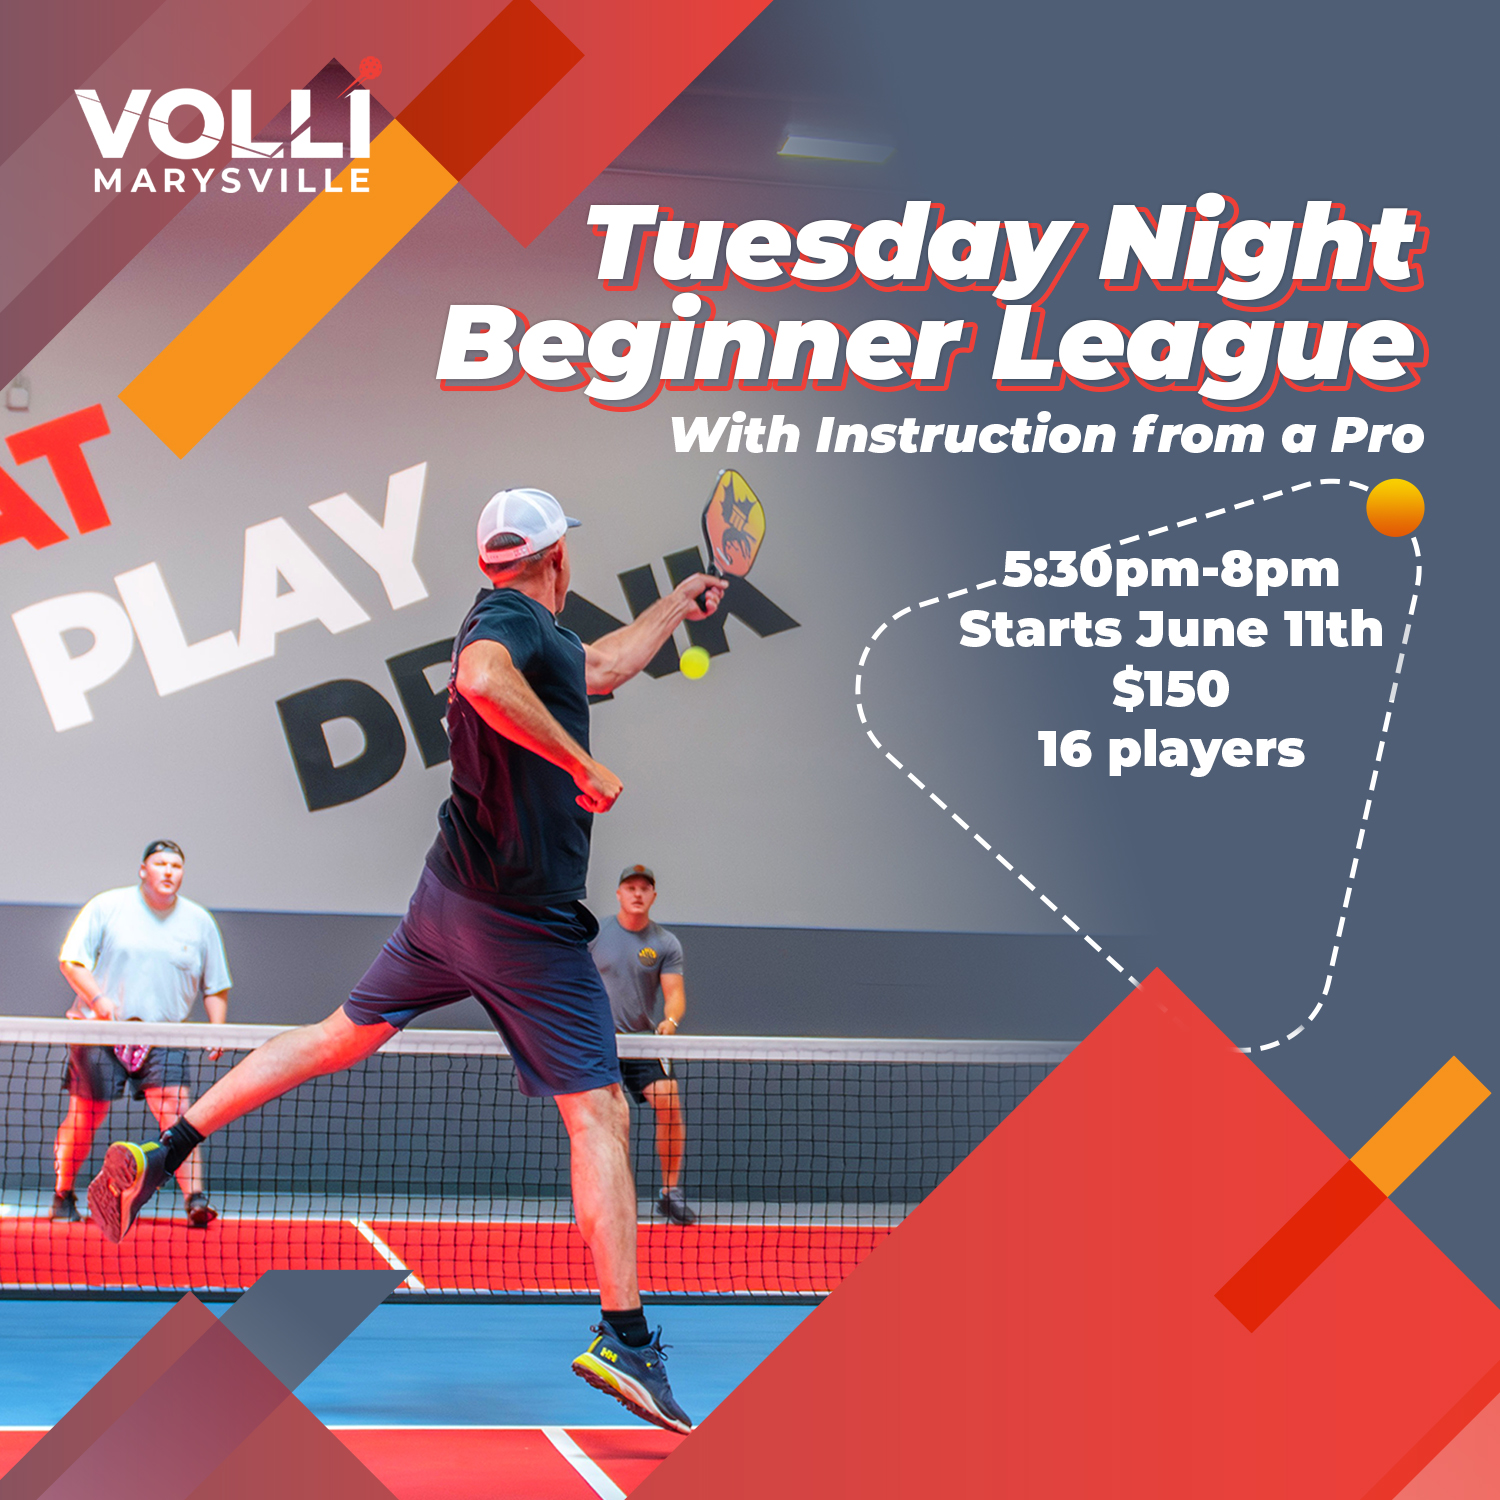 Tuesday Night Beginner League With Instruction from a Pro